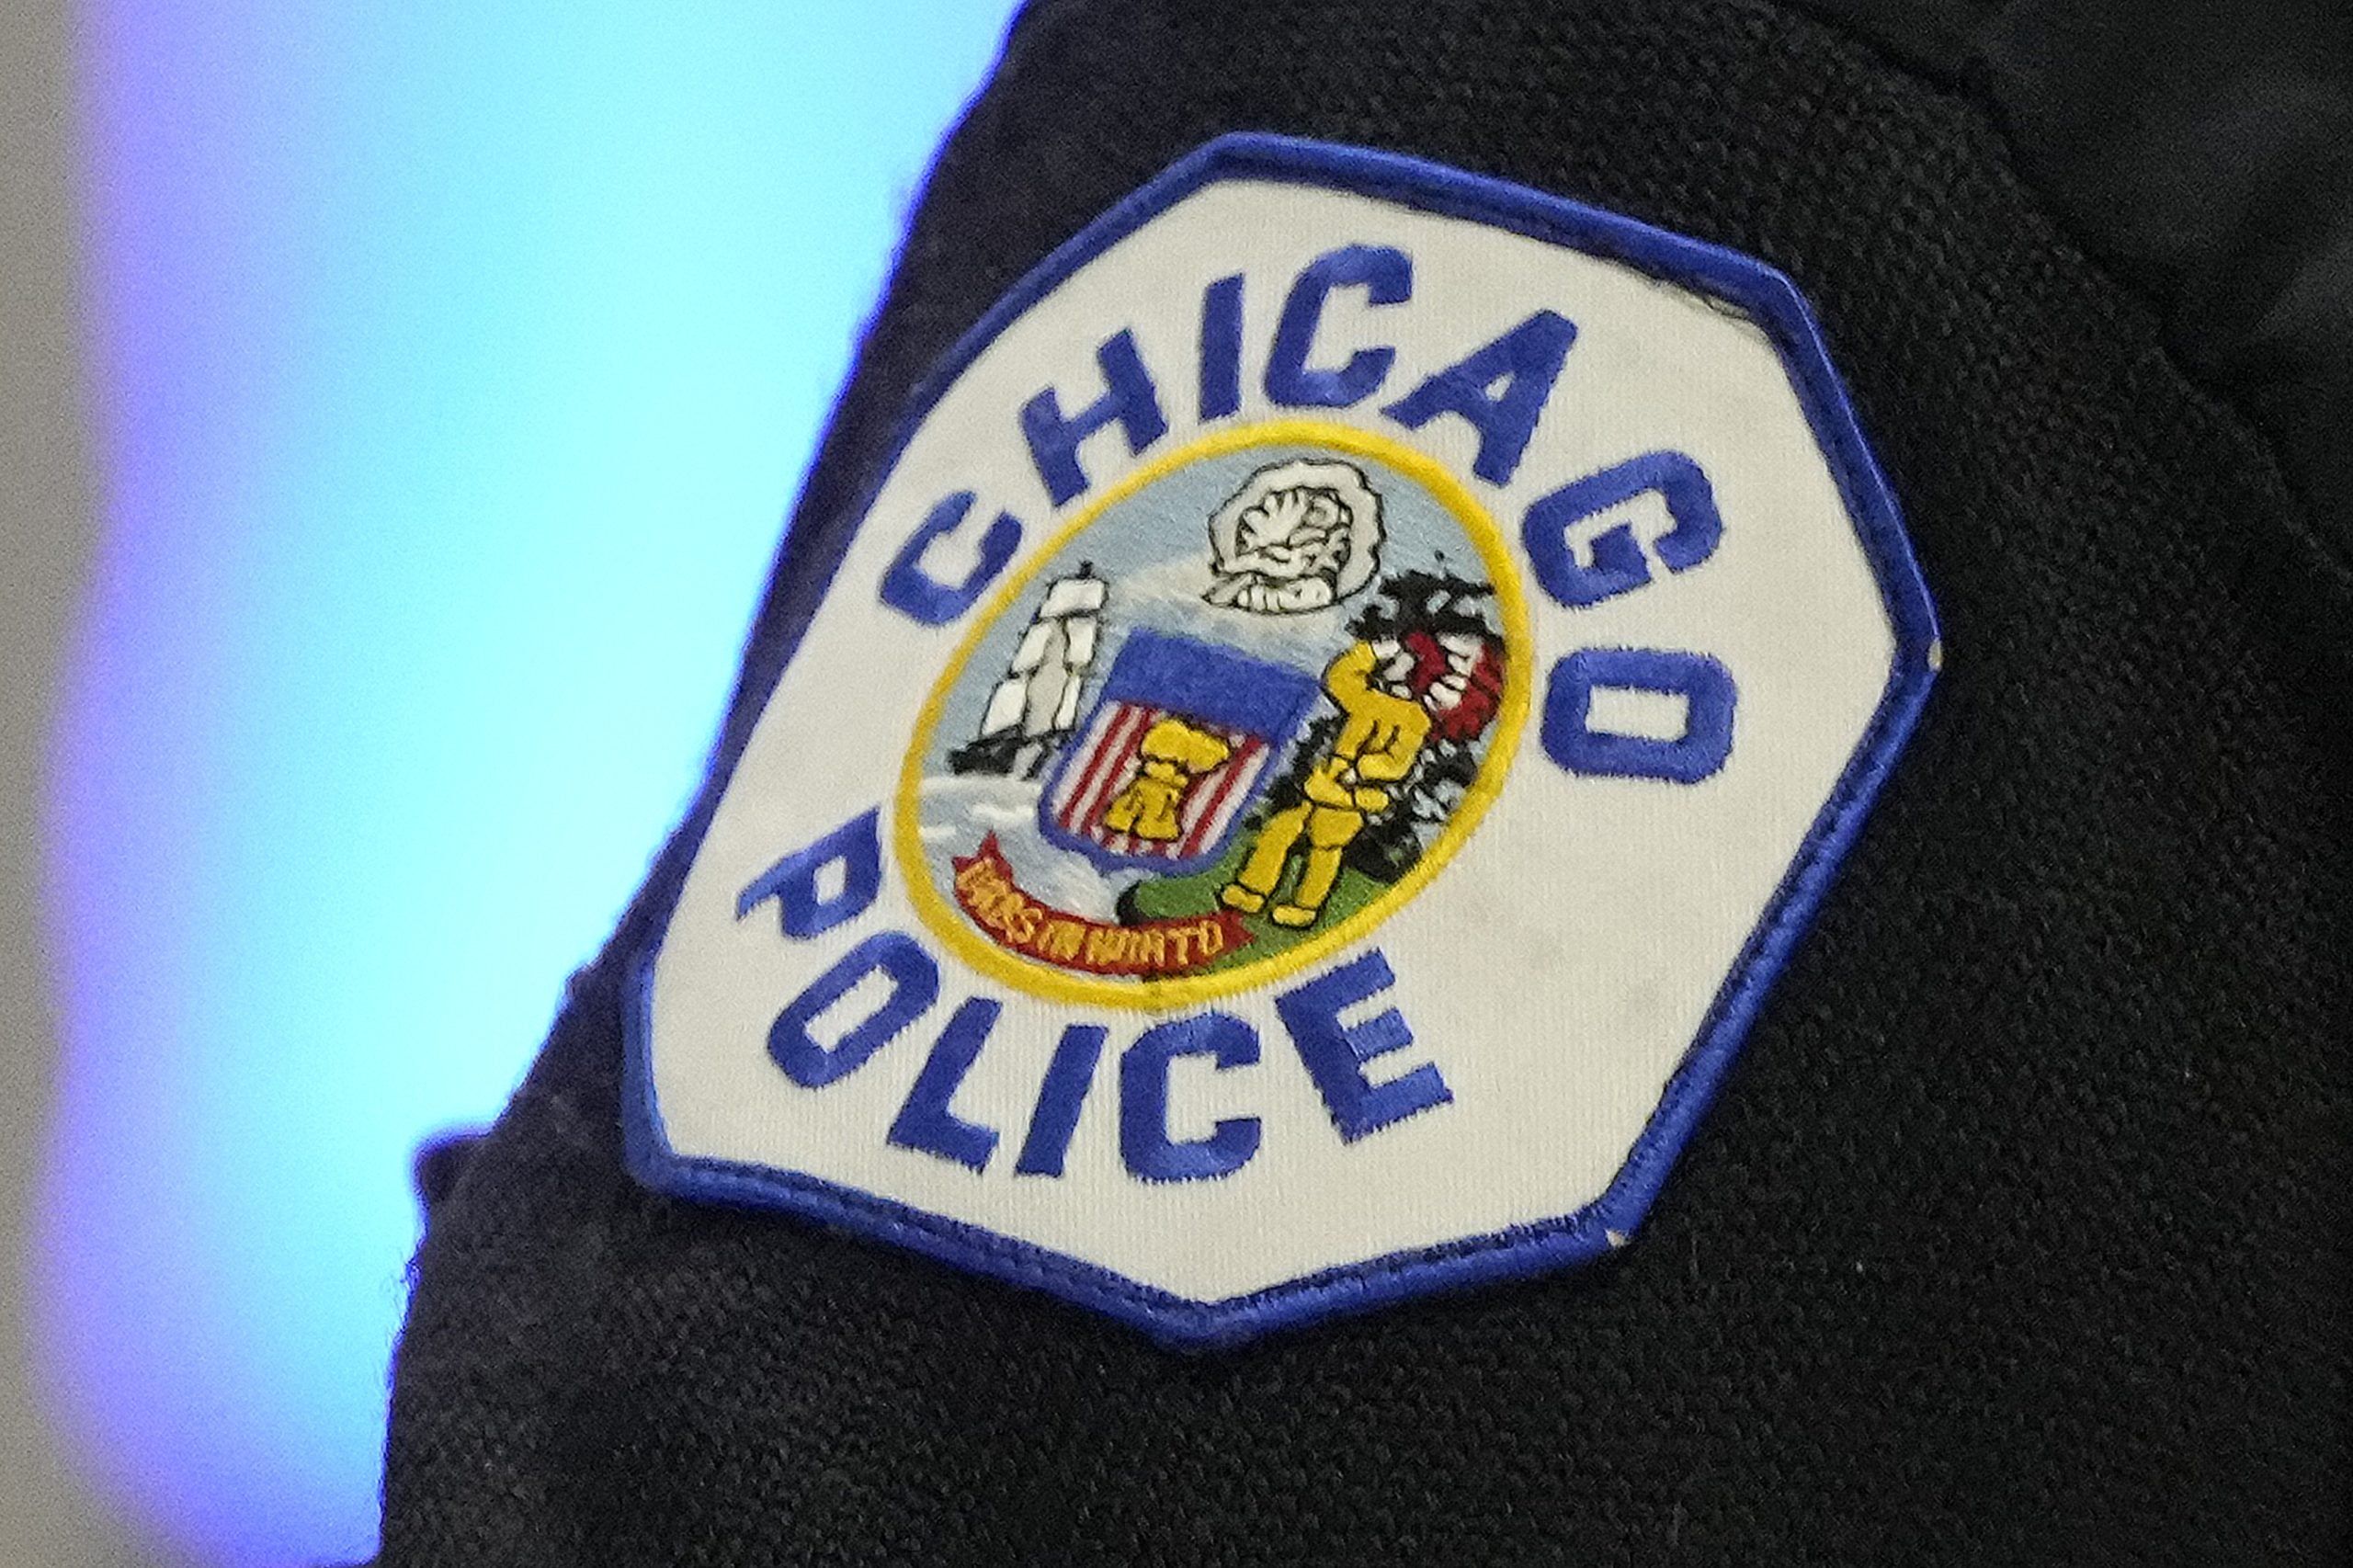 Police In Chicago Fired 96 Shots During A Traffic Stop, Killing A Black Motorist